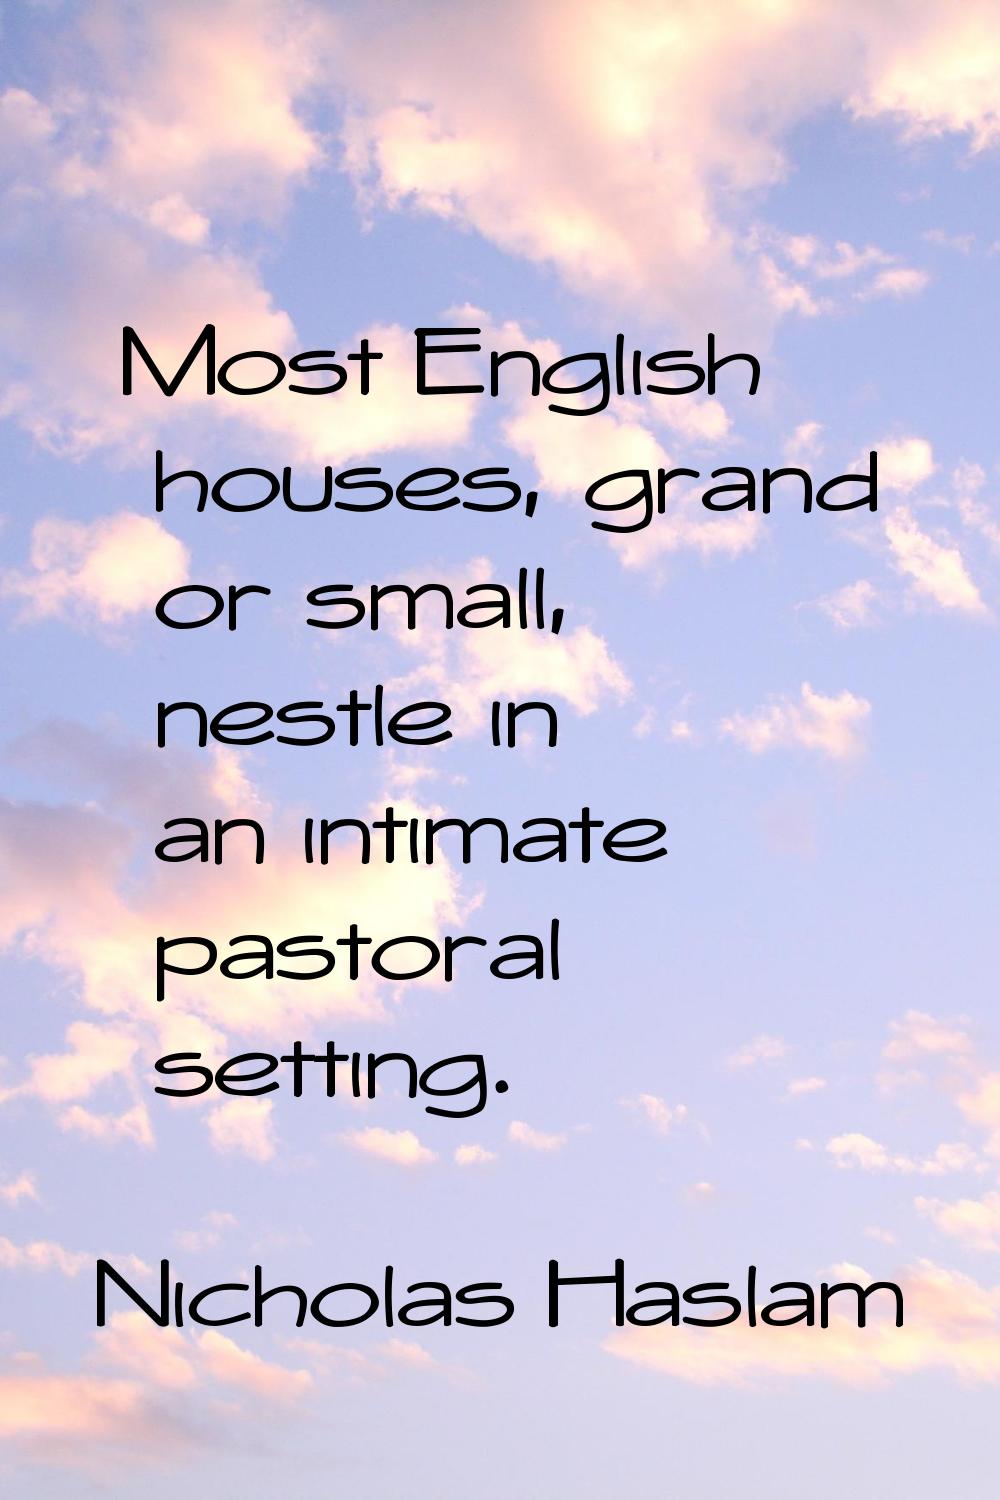 Most English houses, grand or small, nestle in an intimate pastoral setting.